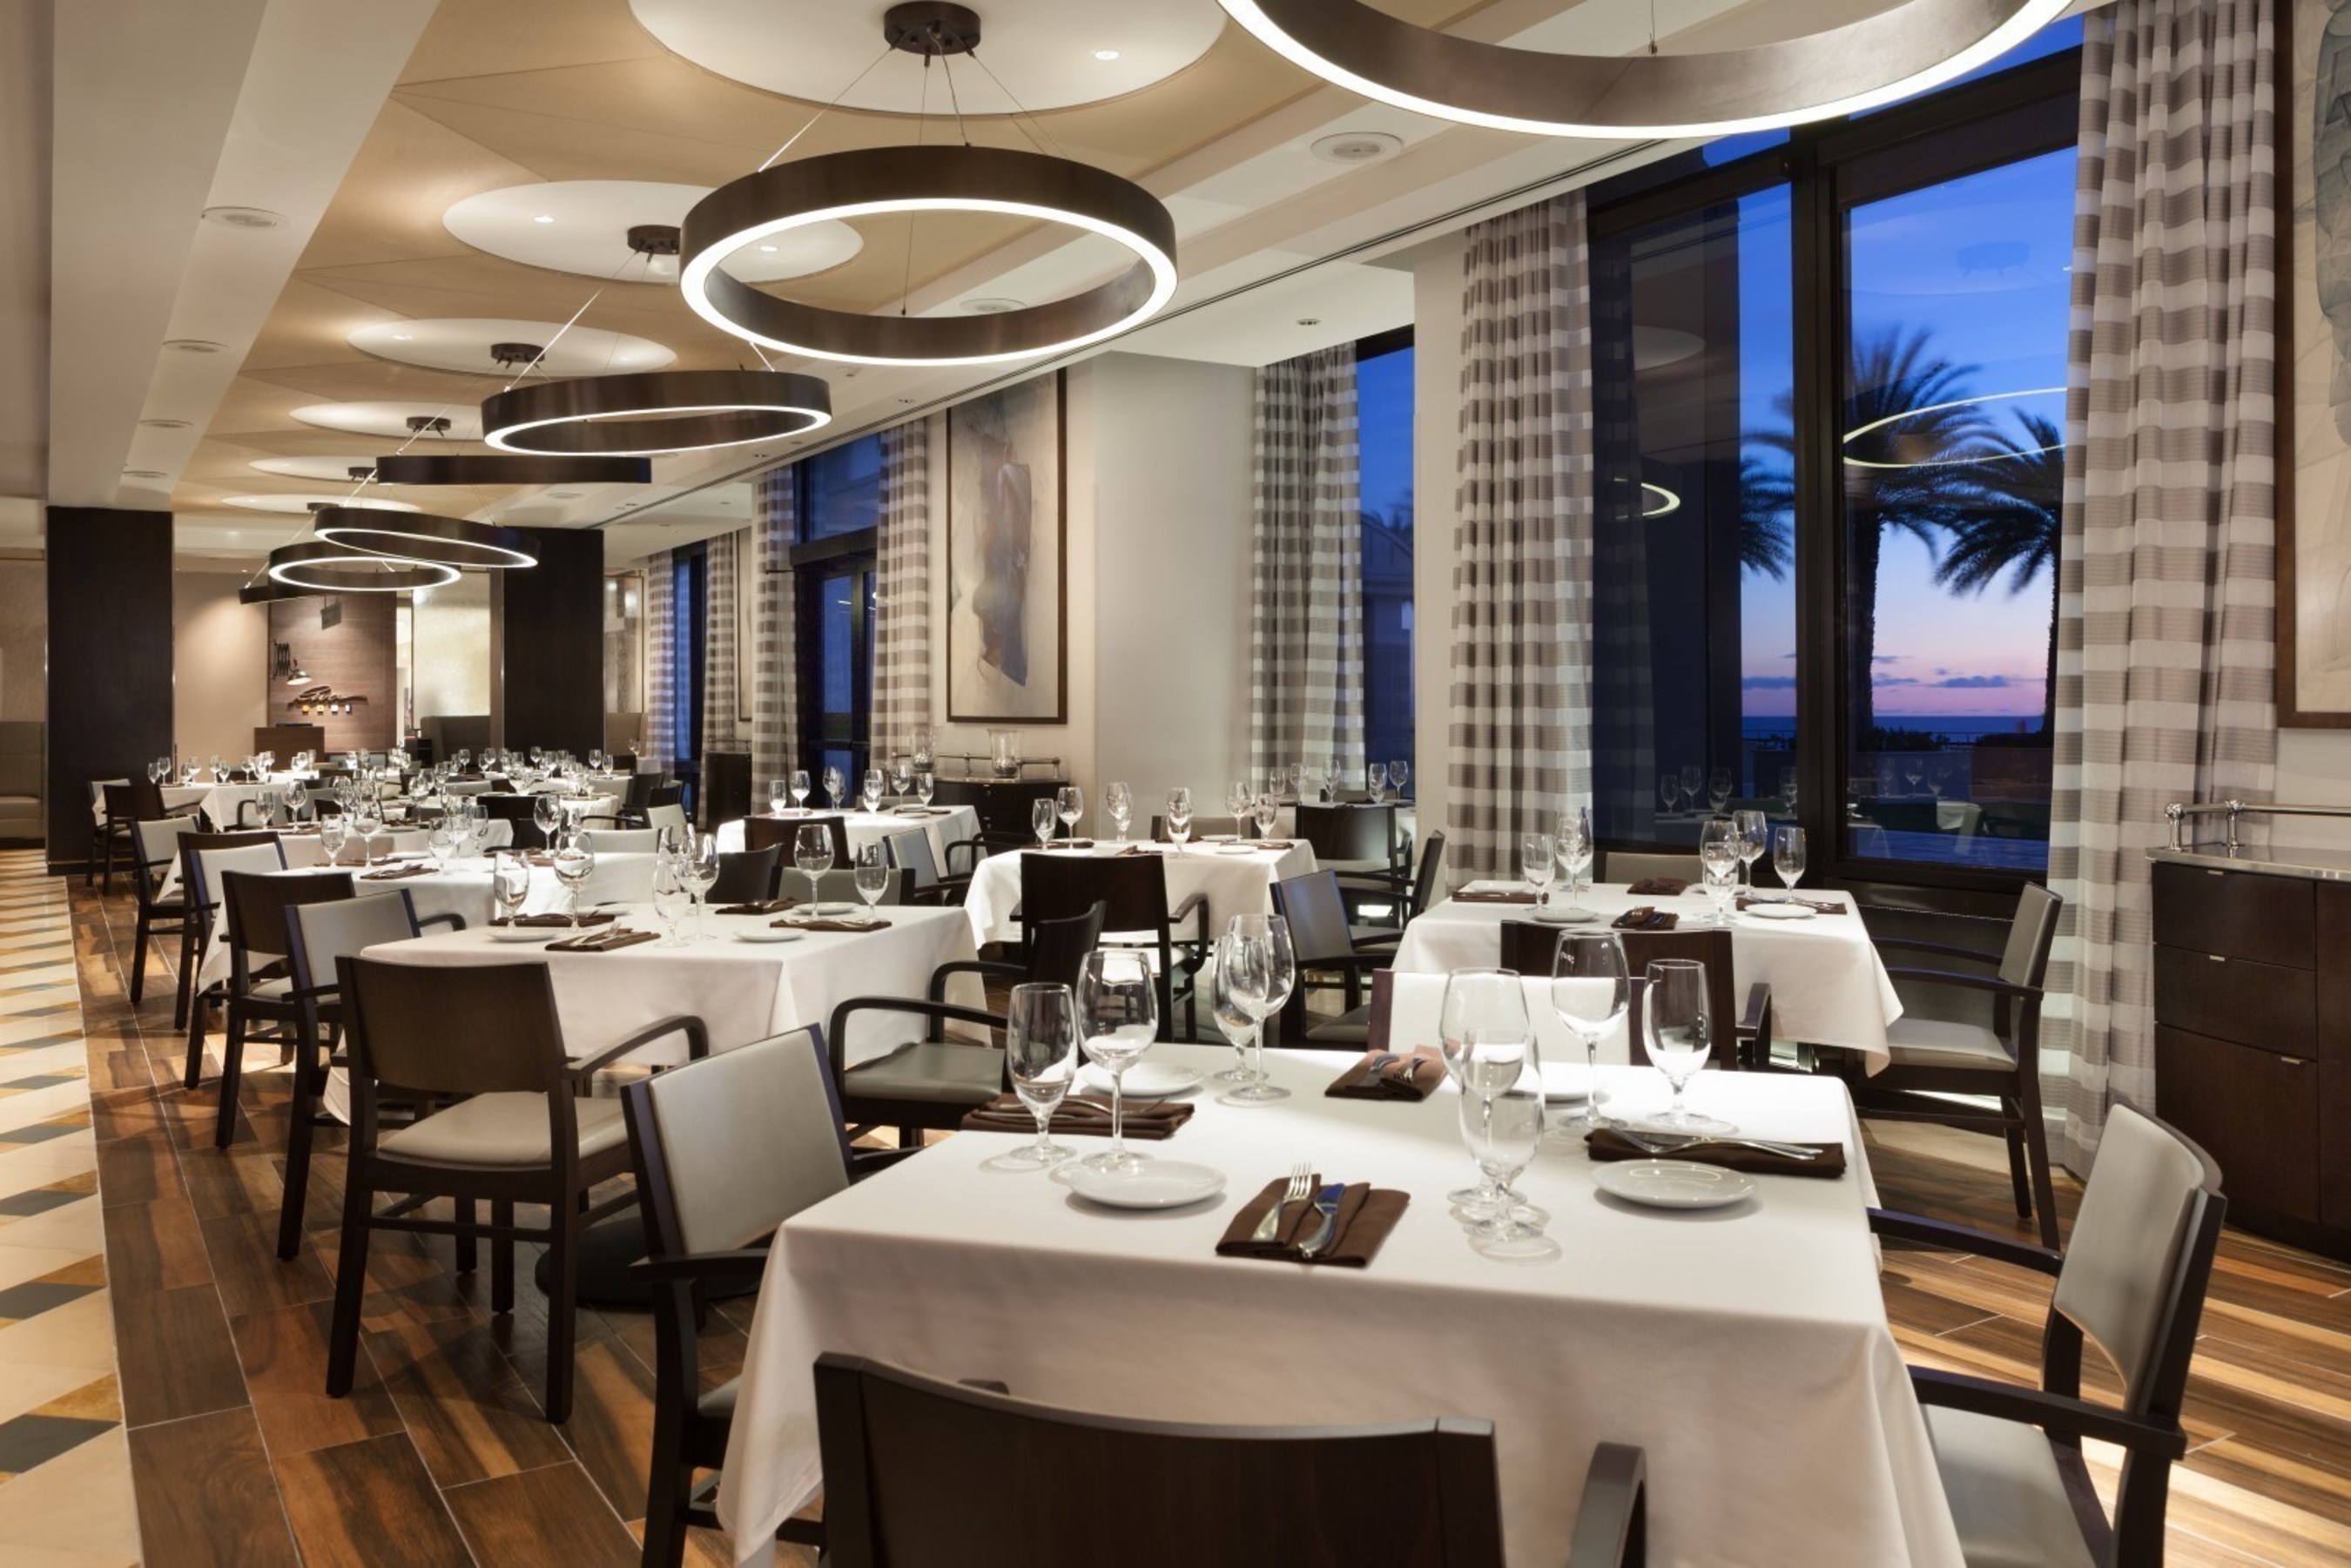 Renovation At 3030 Ocean Enhances Dining Experience At Fort Lauderdale